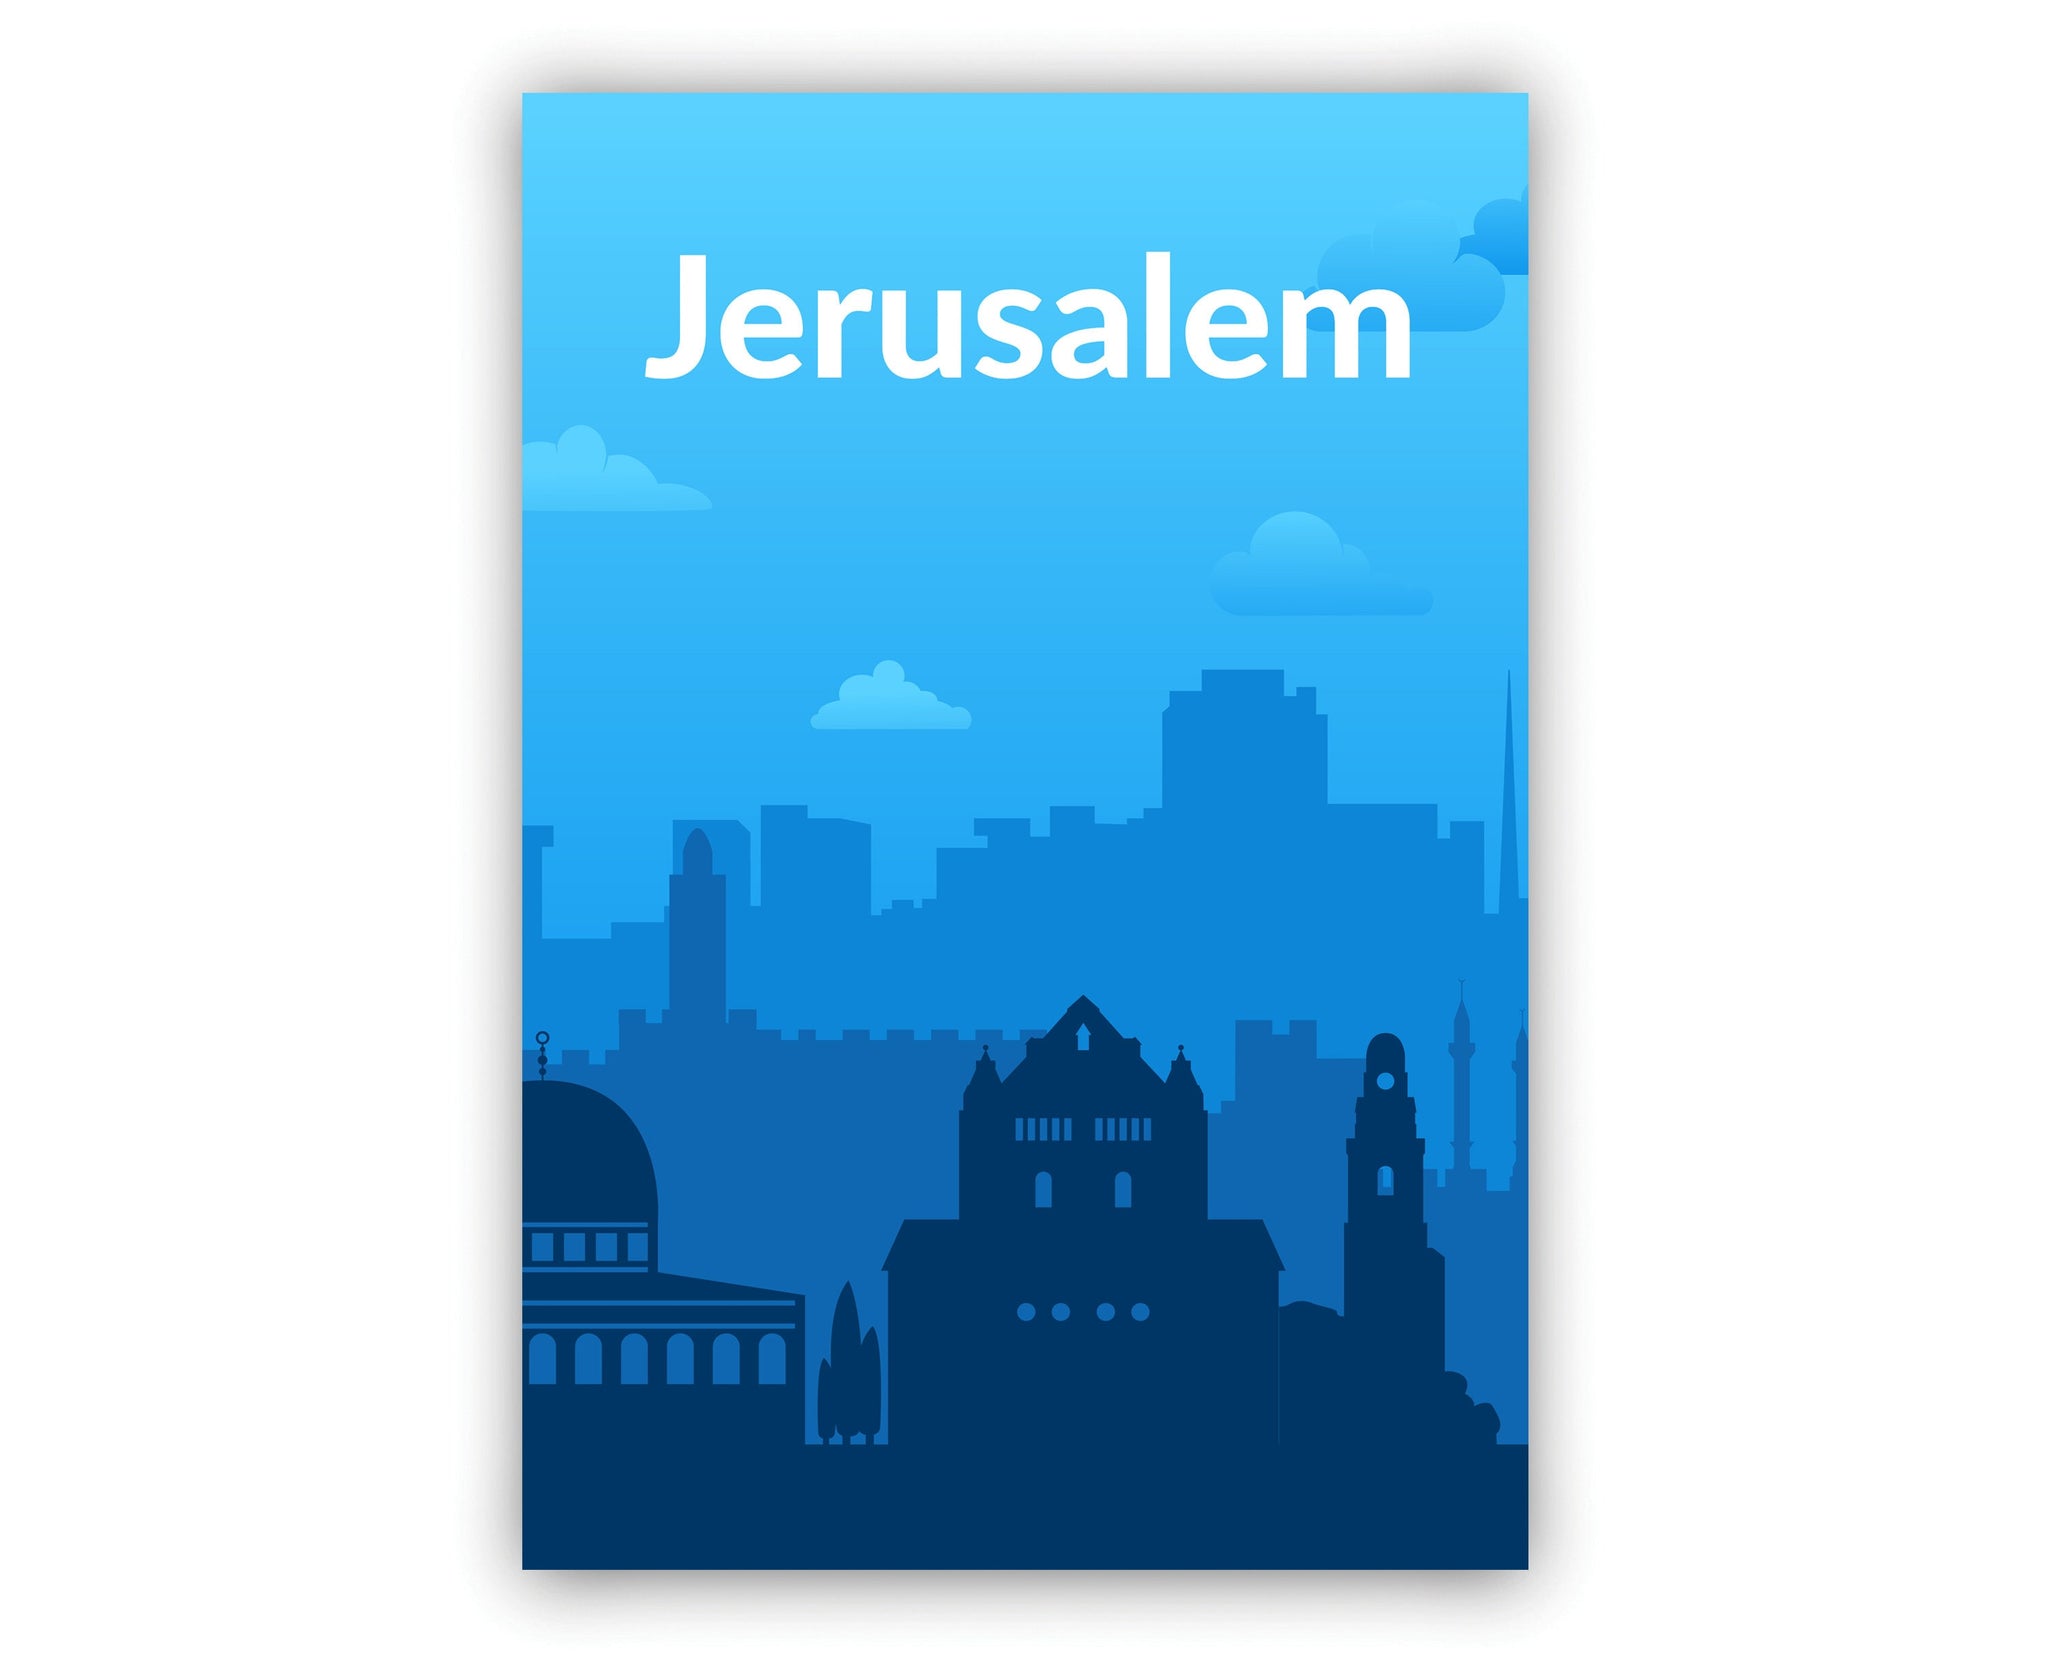 Solid Color World City Poster, Israel Jerusalem Solid Color Modern Poster Print, Jerusalem Modern City Poster, Office Wall Decoration